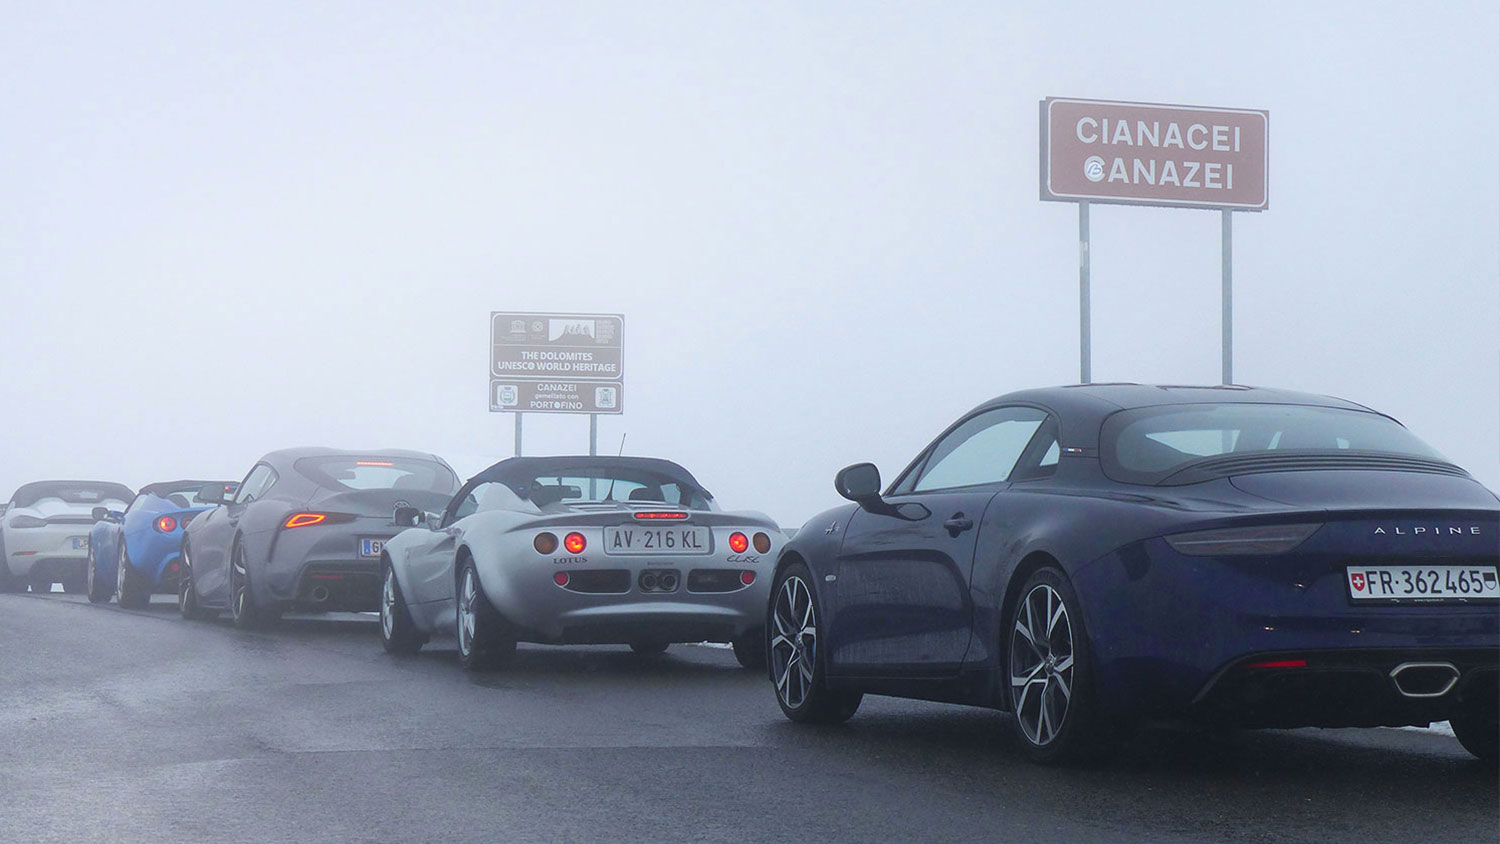 Cars at the top of the pass during the Dolomites Spring Tour